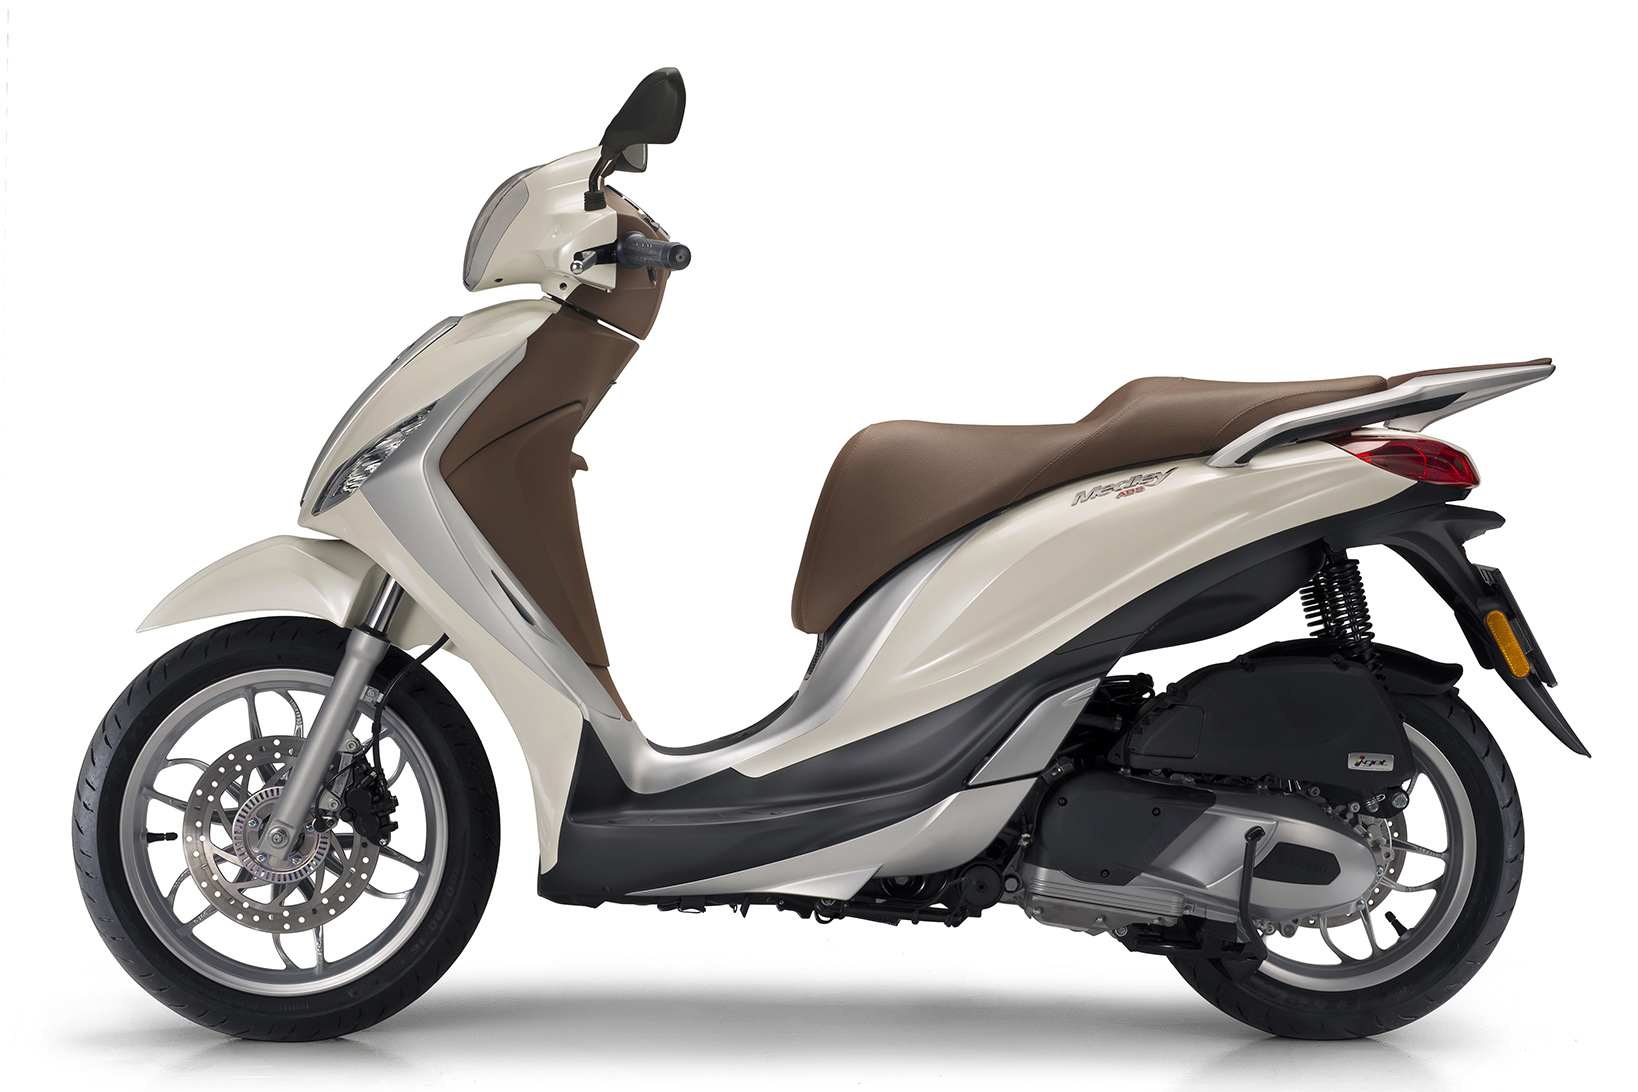 Piaggio launches new Medley scooter plus updates to existing models